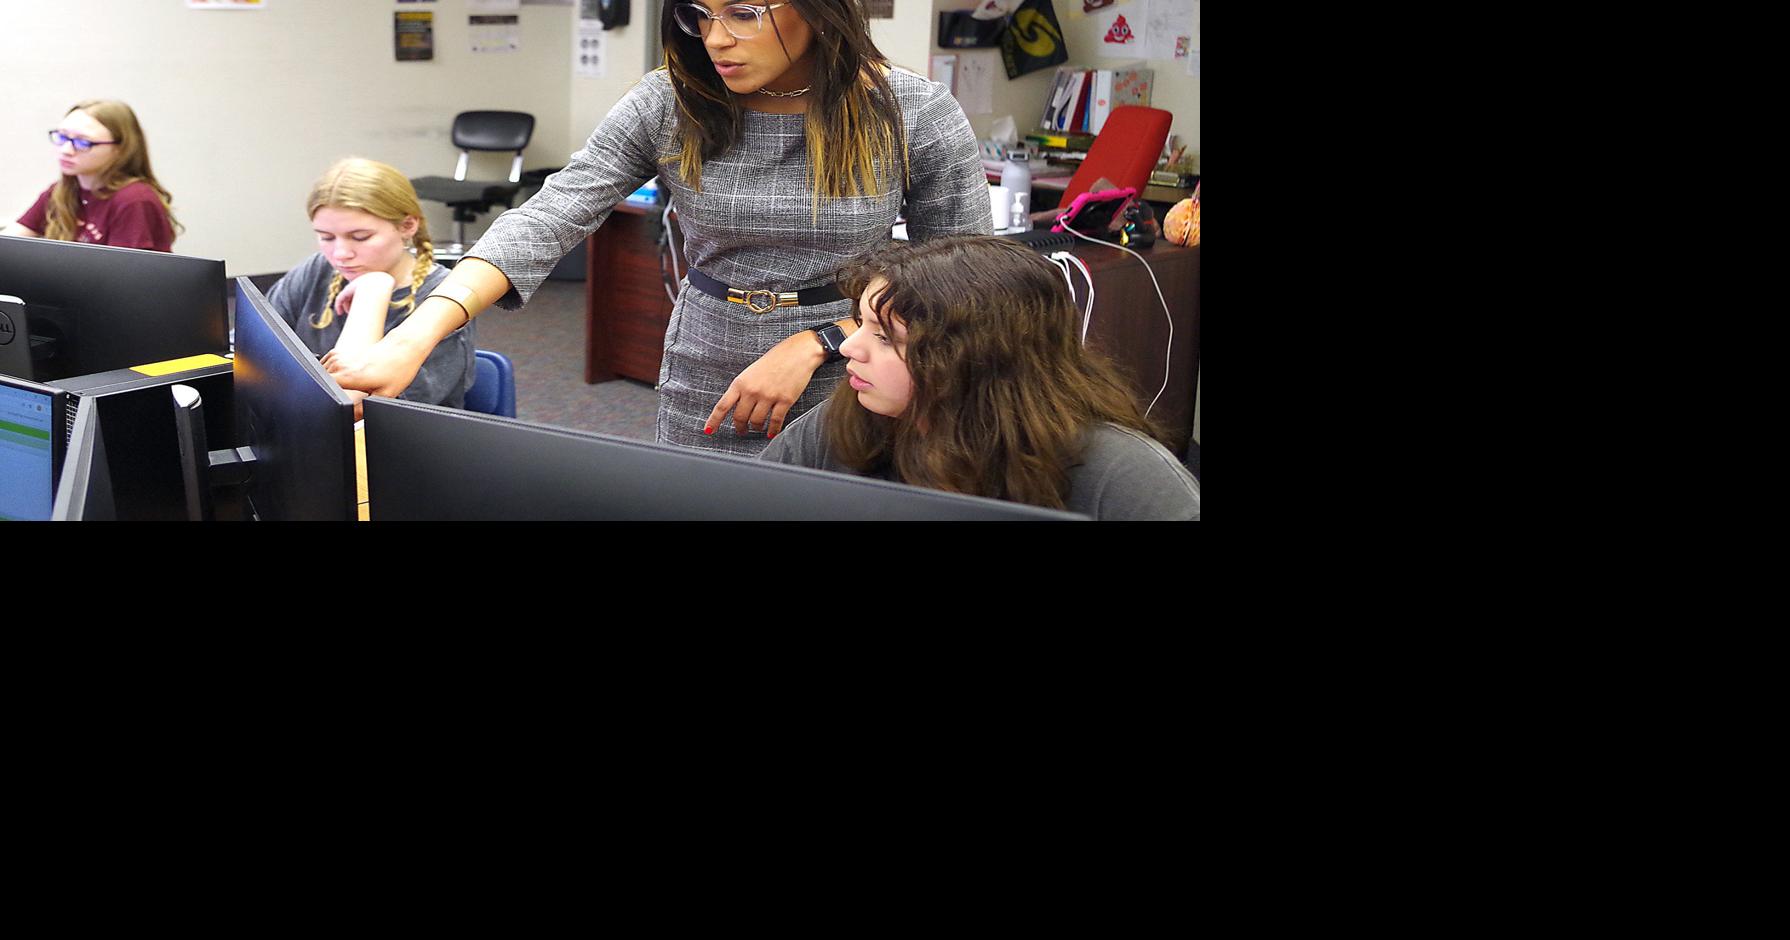 Citrus High’s Girls Who Code Club works to close computer-science gender gap | Local News